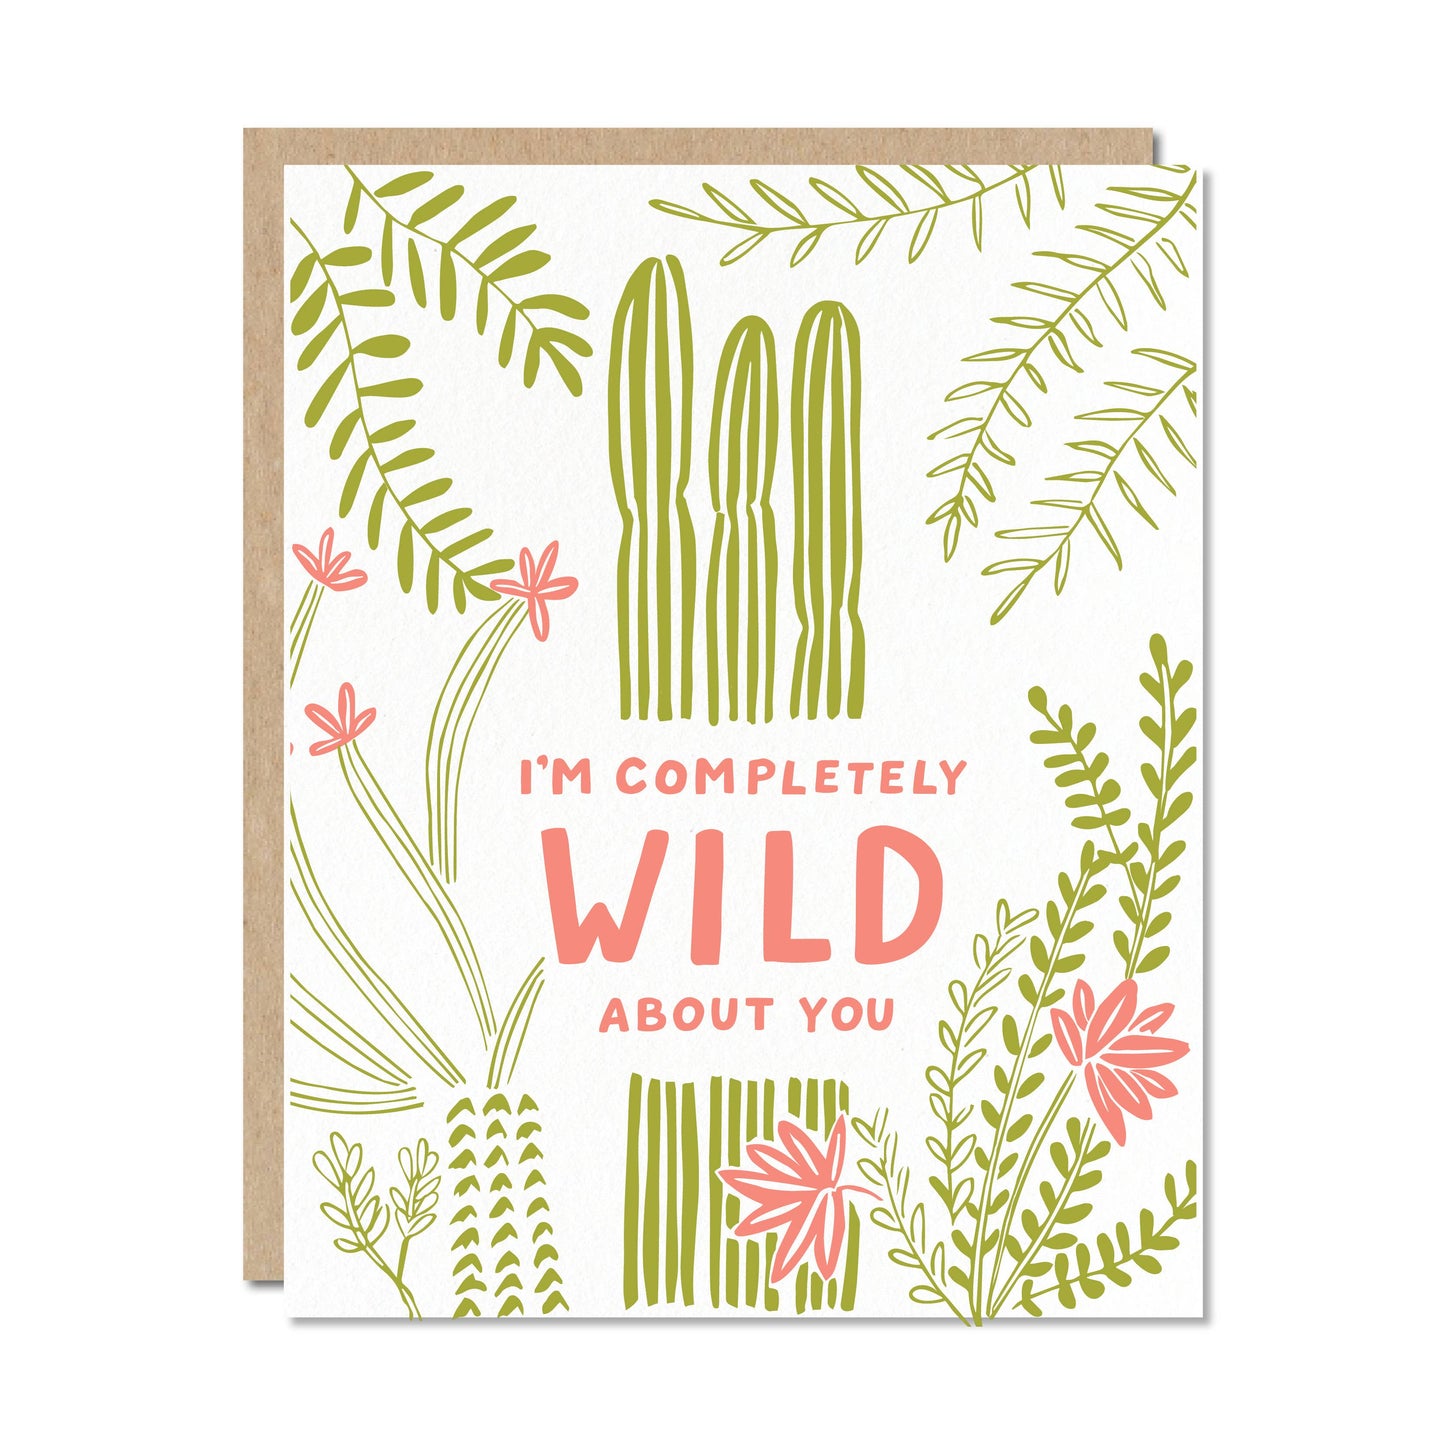 Wild about you - Card